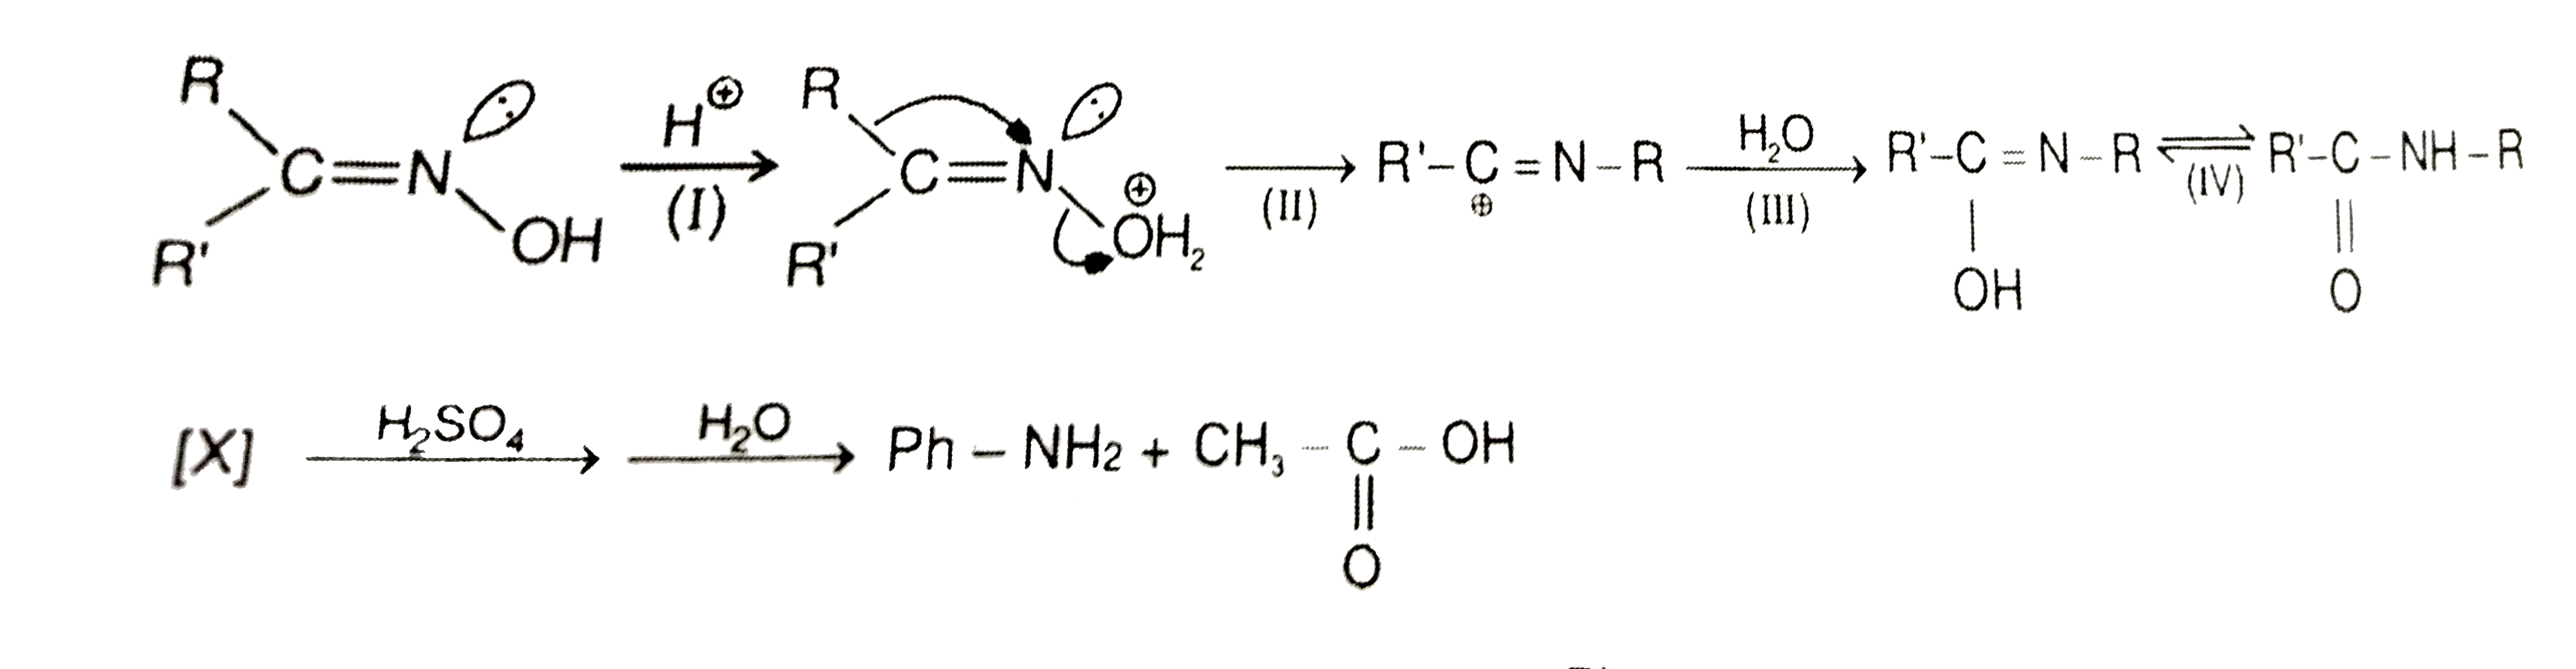 Alldehydes and Ketones react with NH(2)OH to form aldoximes and Ketoximes respectively. Configuration of these can be determined by Beckmann rearragement as that group migrates which is anti w.r.t -OH      [X] overset(H(2)SO(4))to overset(H(2)O)to Ph-NH(2)+CH(3)-underset(O)underset(||)(C)-OH   Identify the configuration of [X] compound